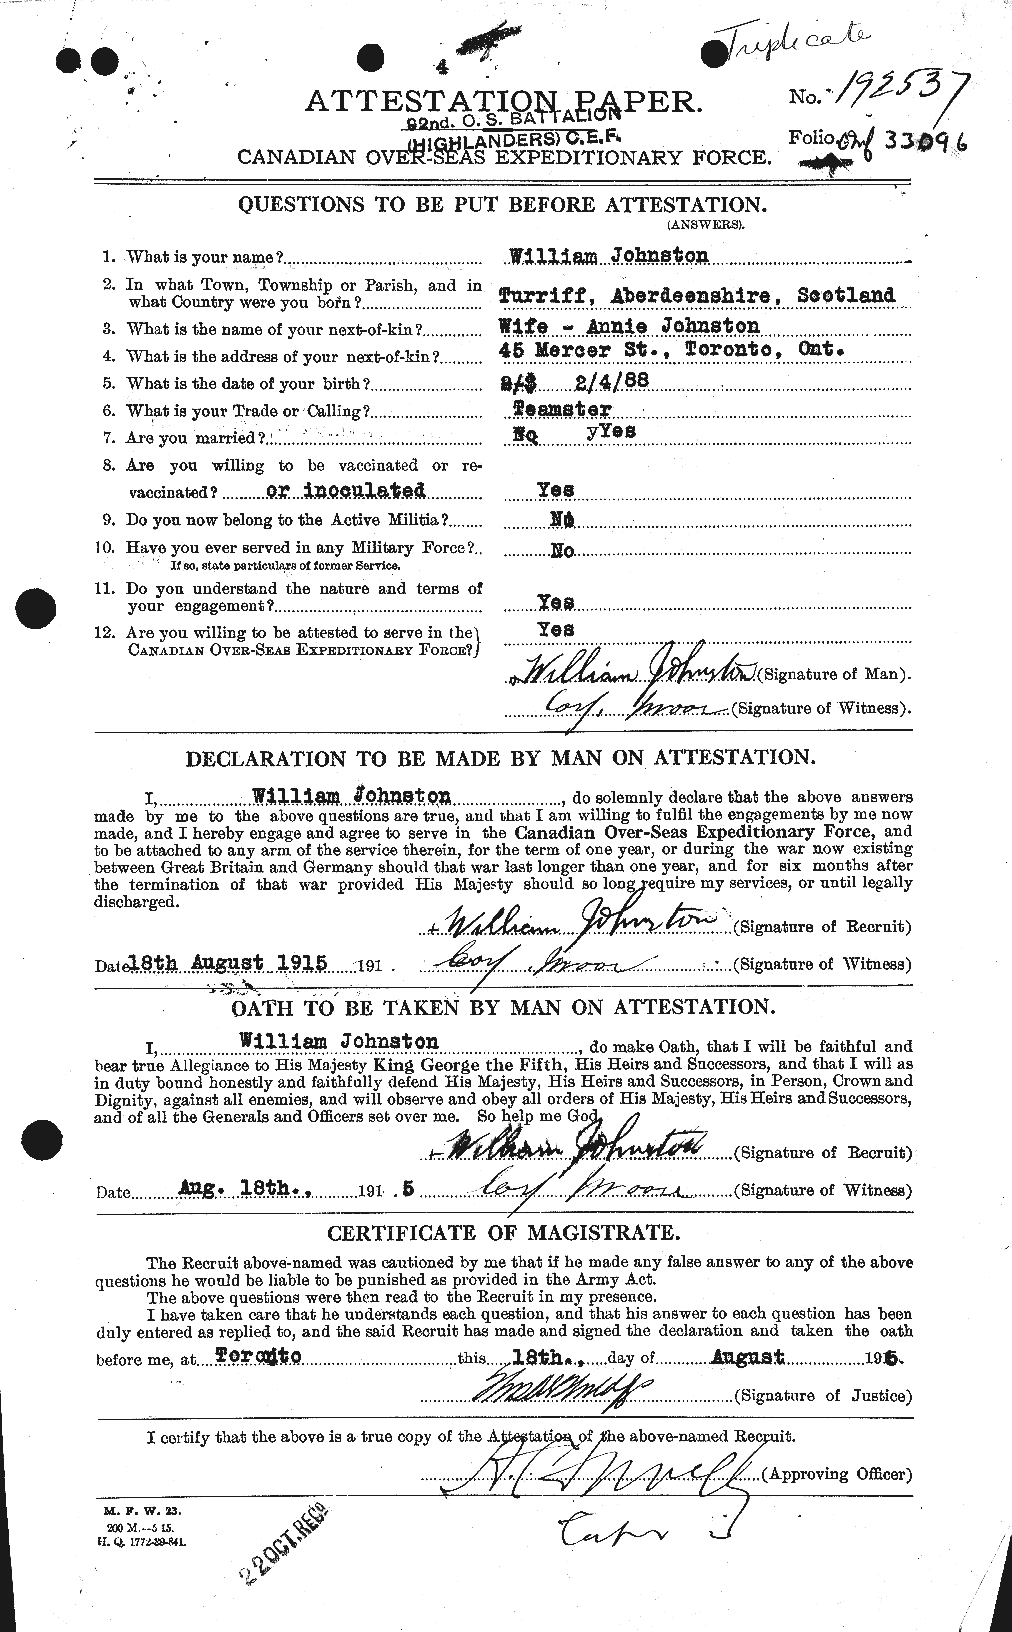 Personnel Records of the First World War - CEF 427257a